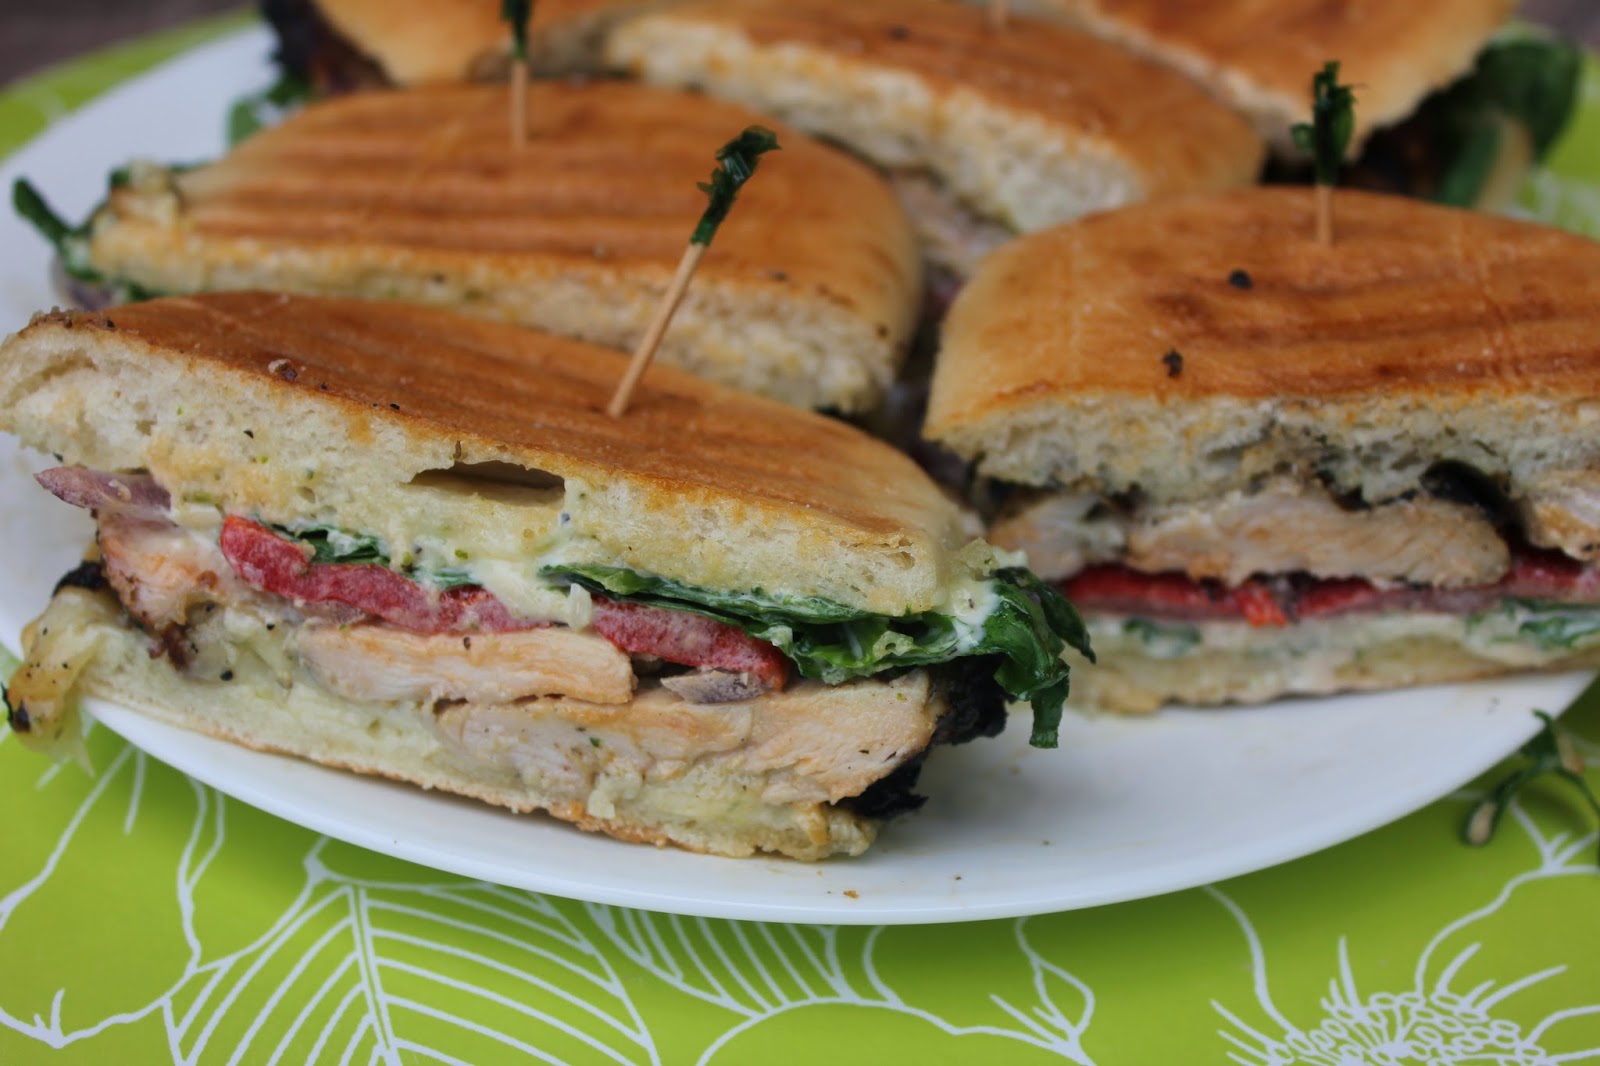 Recipe: Chicken, Recipe: Sandwiches, Easy Meal Ideas, easy marinade, Pesto Chicken and Red Pepper Paninis, favorite panini